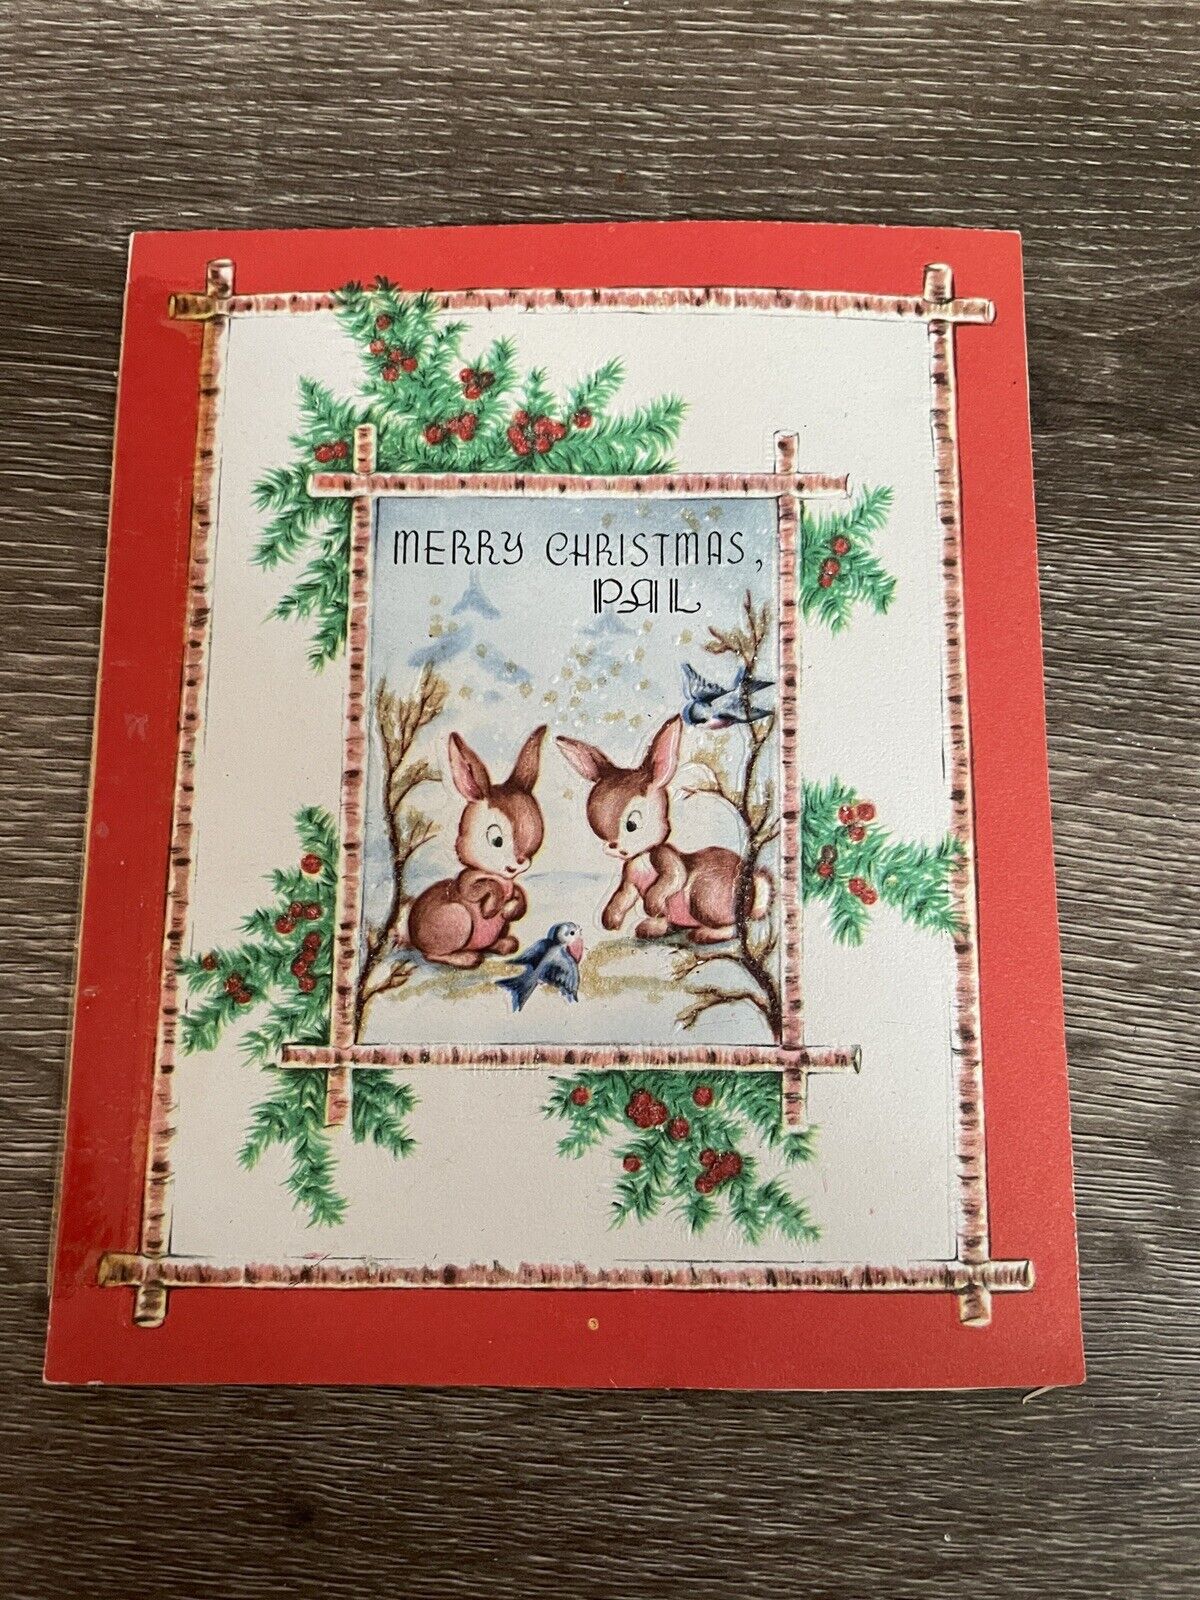 Vintage Christmas Card To Pal Bunnies In Snowy Forest, Used